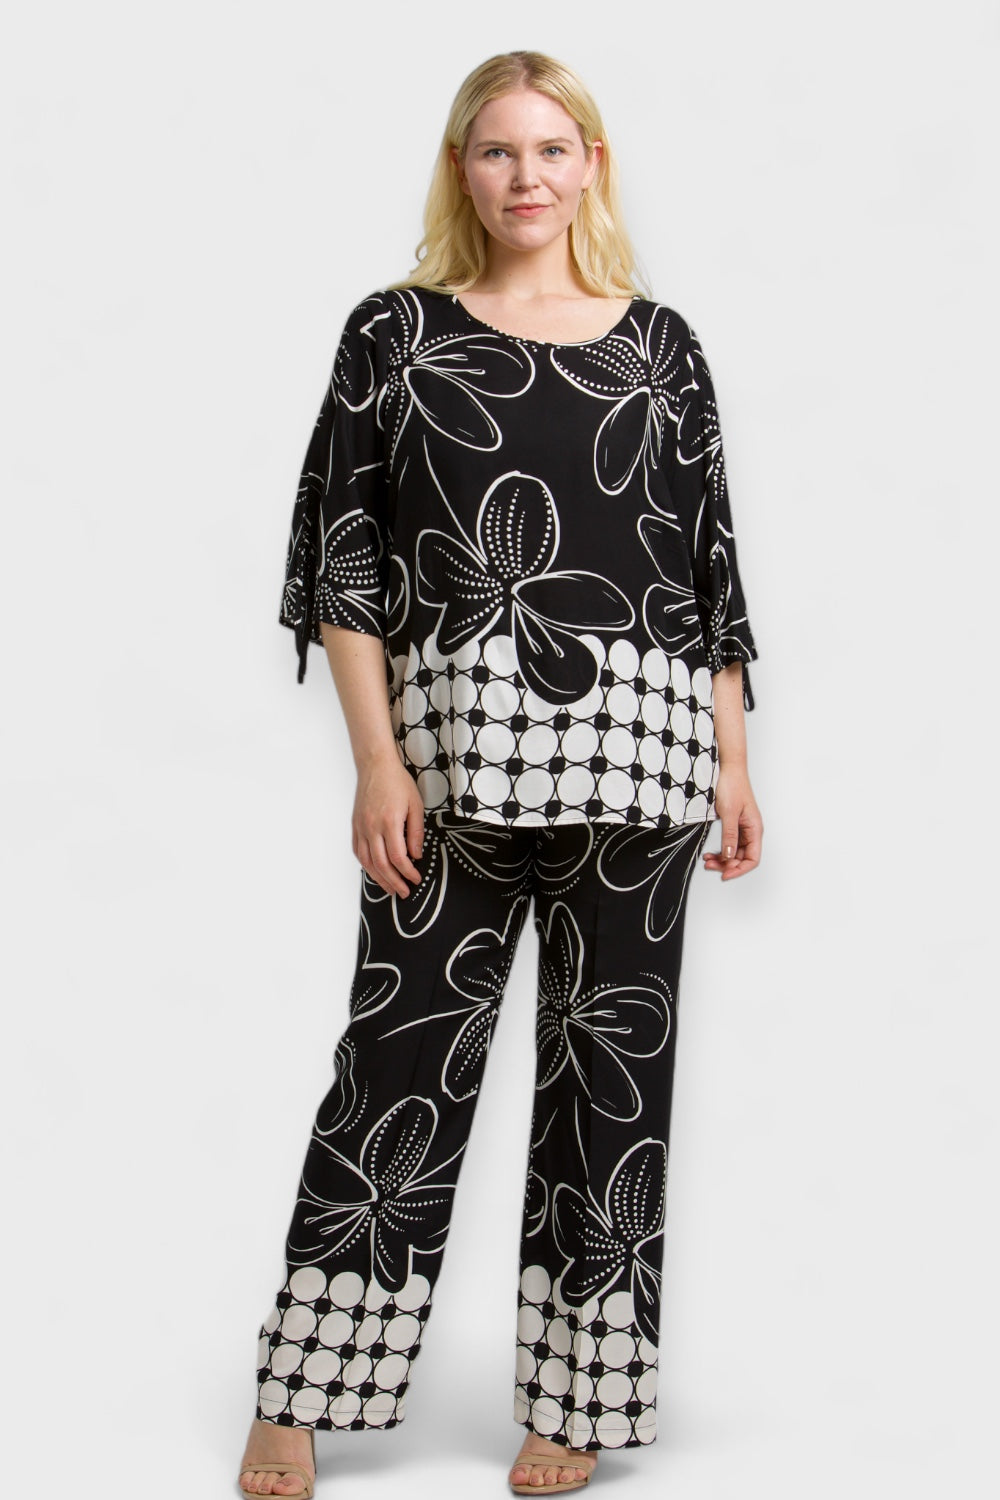 Ava Plus Size Black & White Floral Print Split-Sleeve Blouse by Oltretempo Italian Women's Clothing Paired with Ava Floral Pants